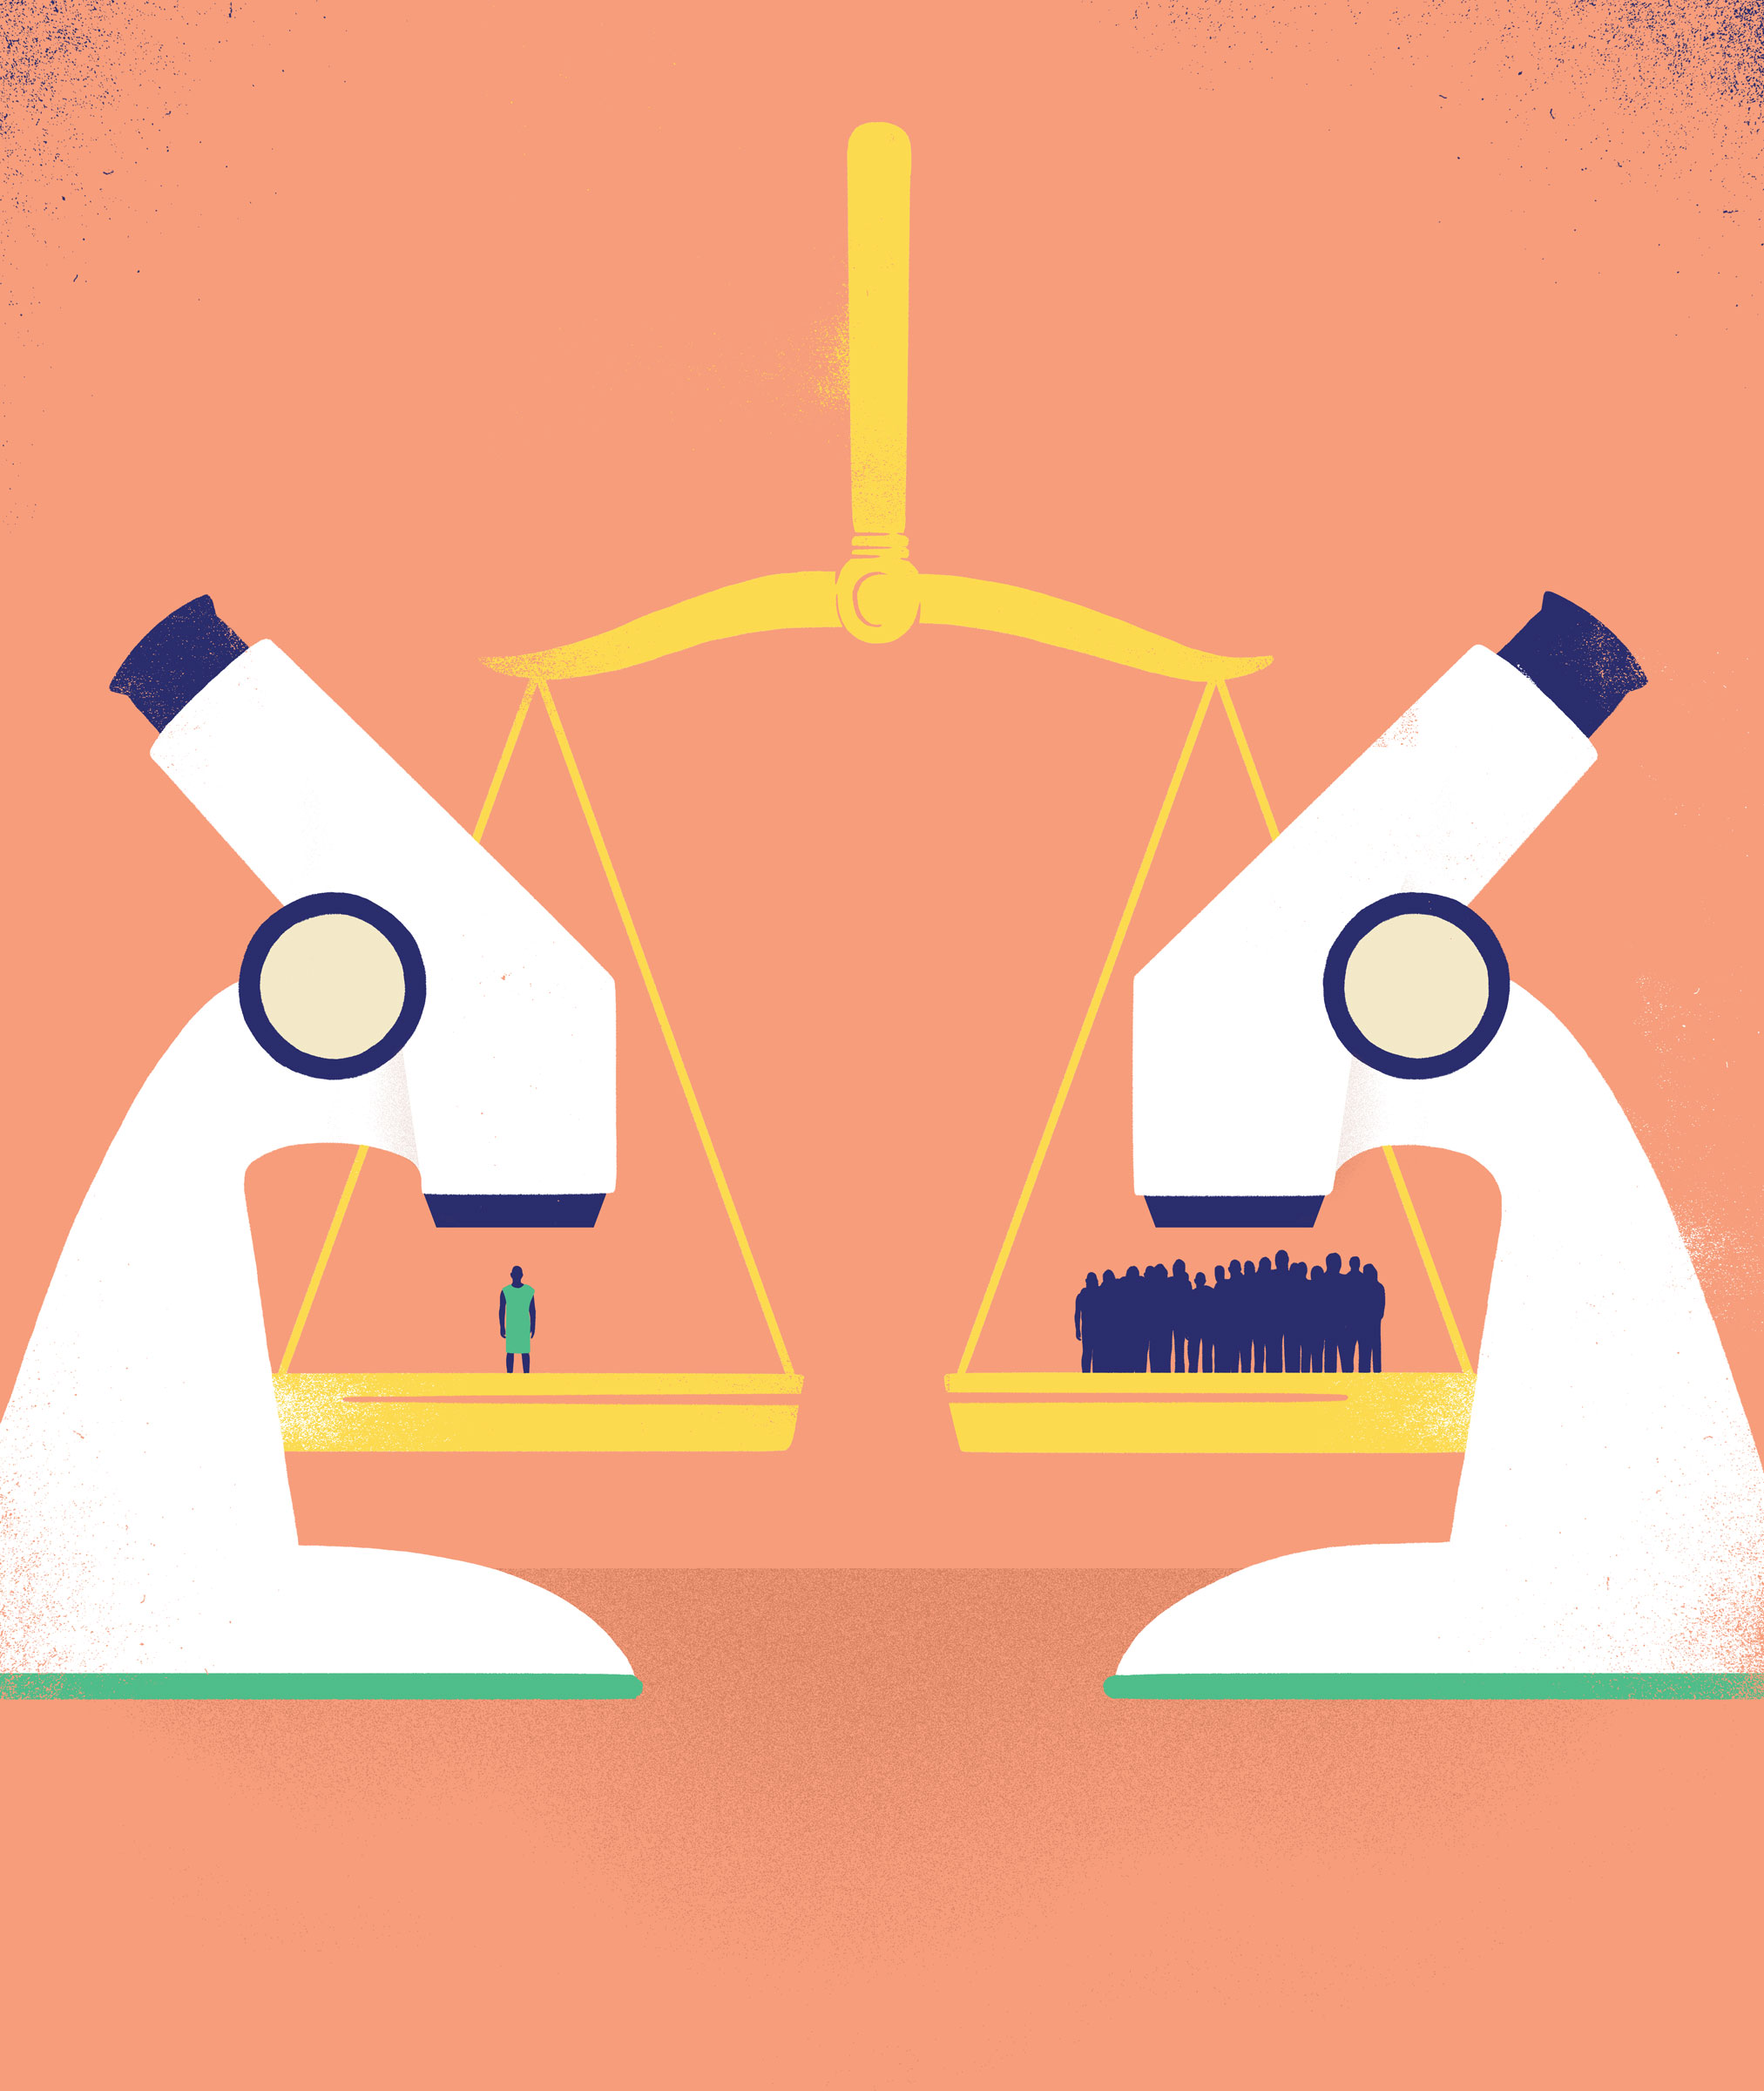 Illustration of two microscopes situated over scales of justice